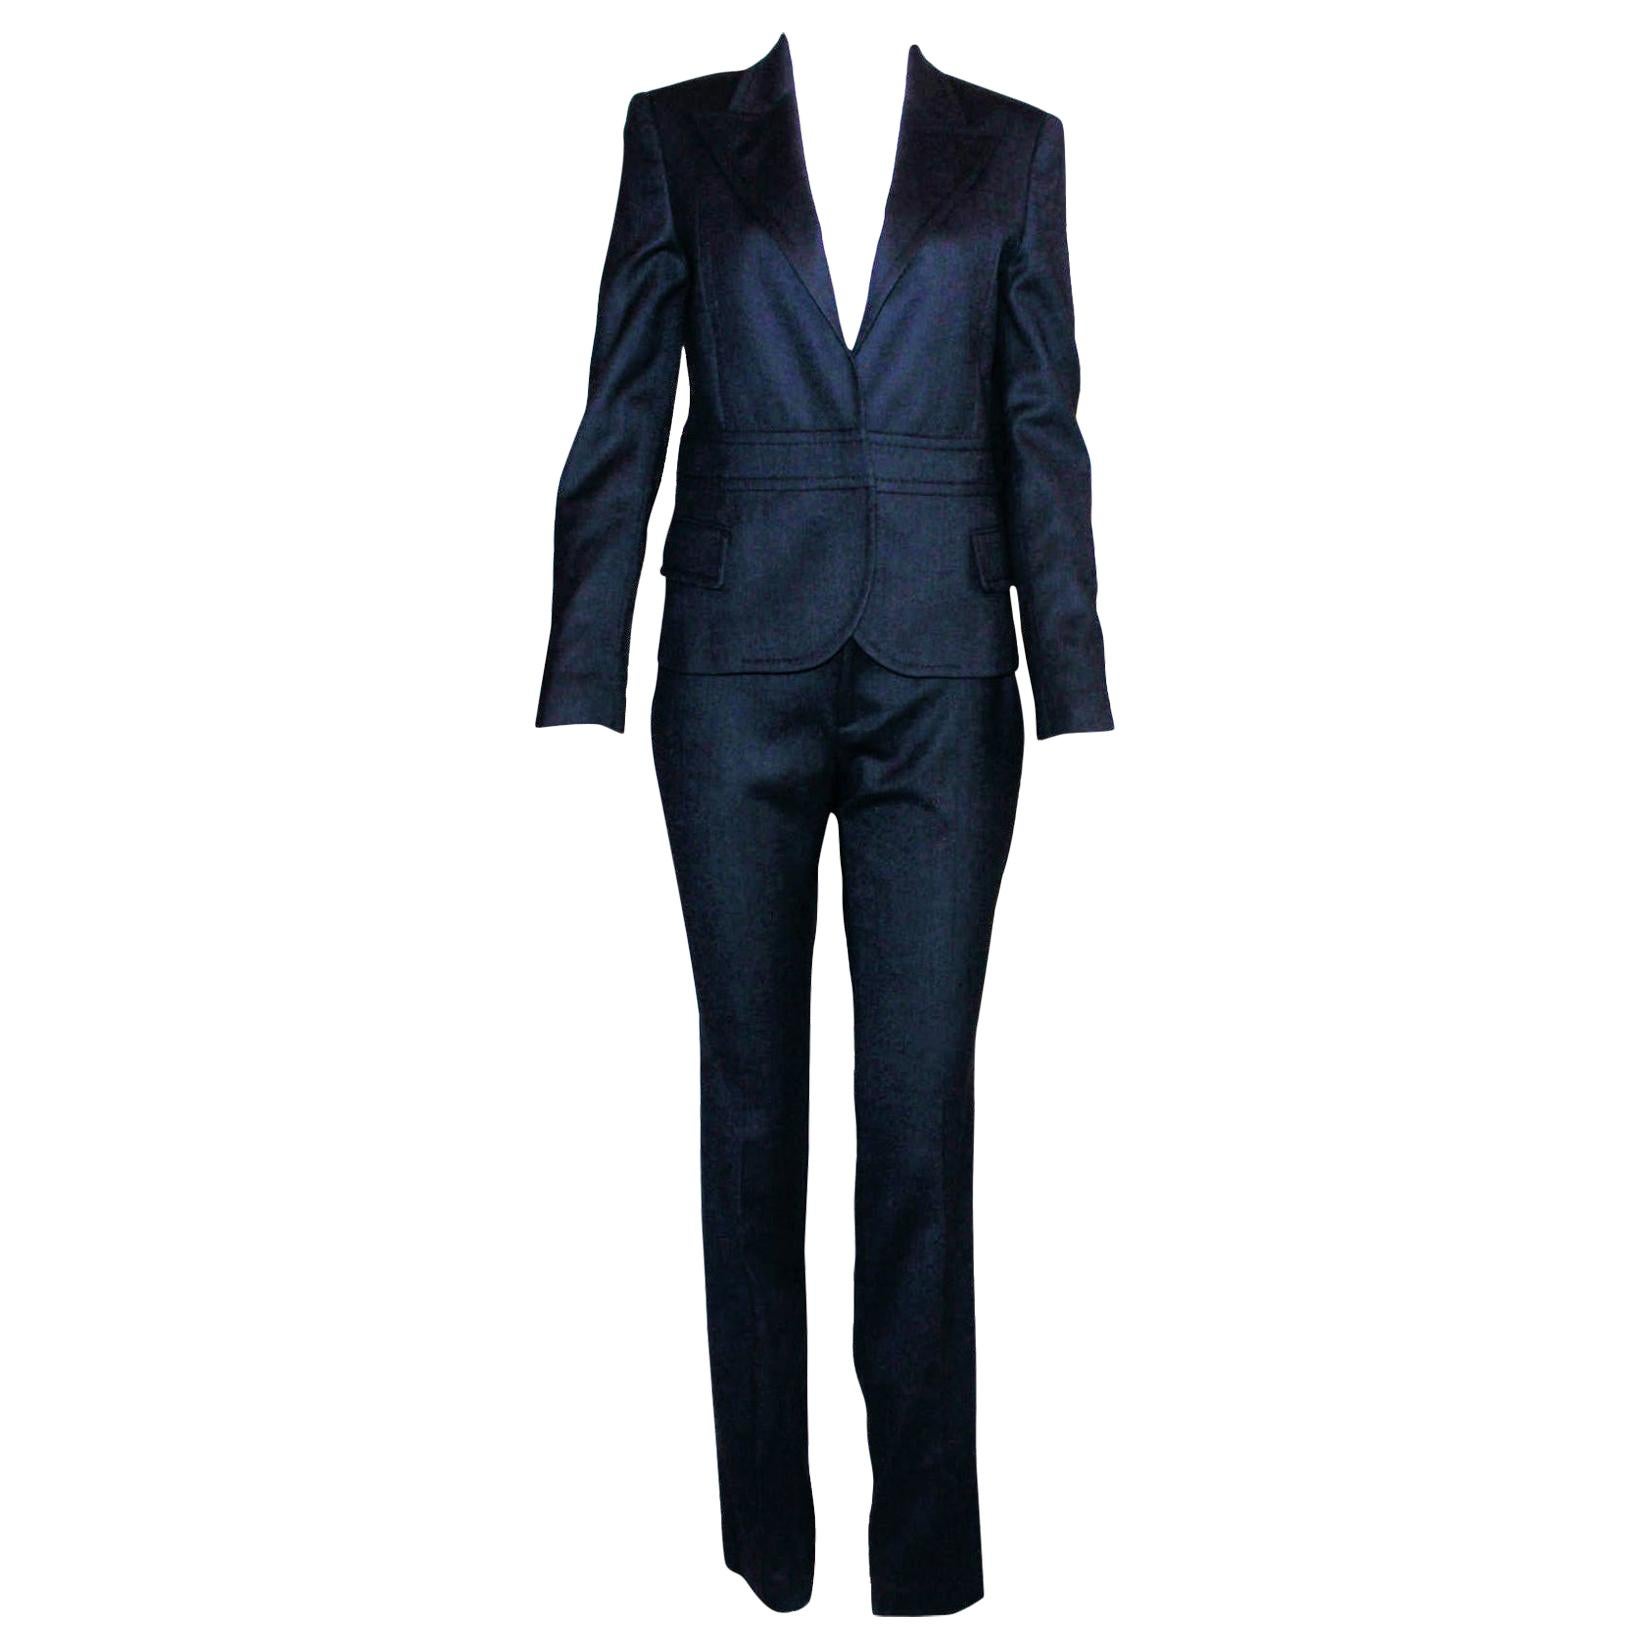 Gorgeous Gucci by Tom Ford Tailored Pant Suit with Leather Detail Trimming